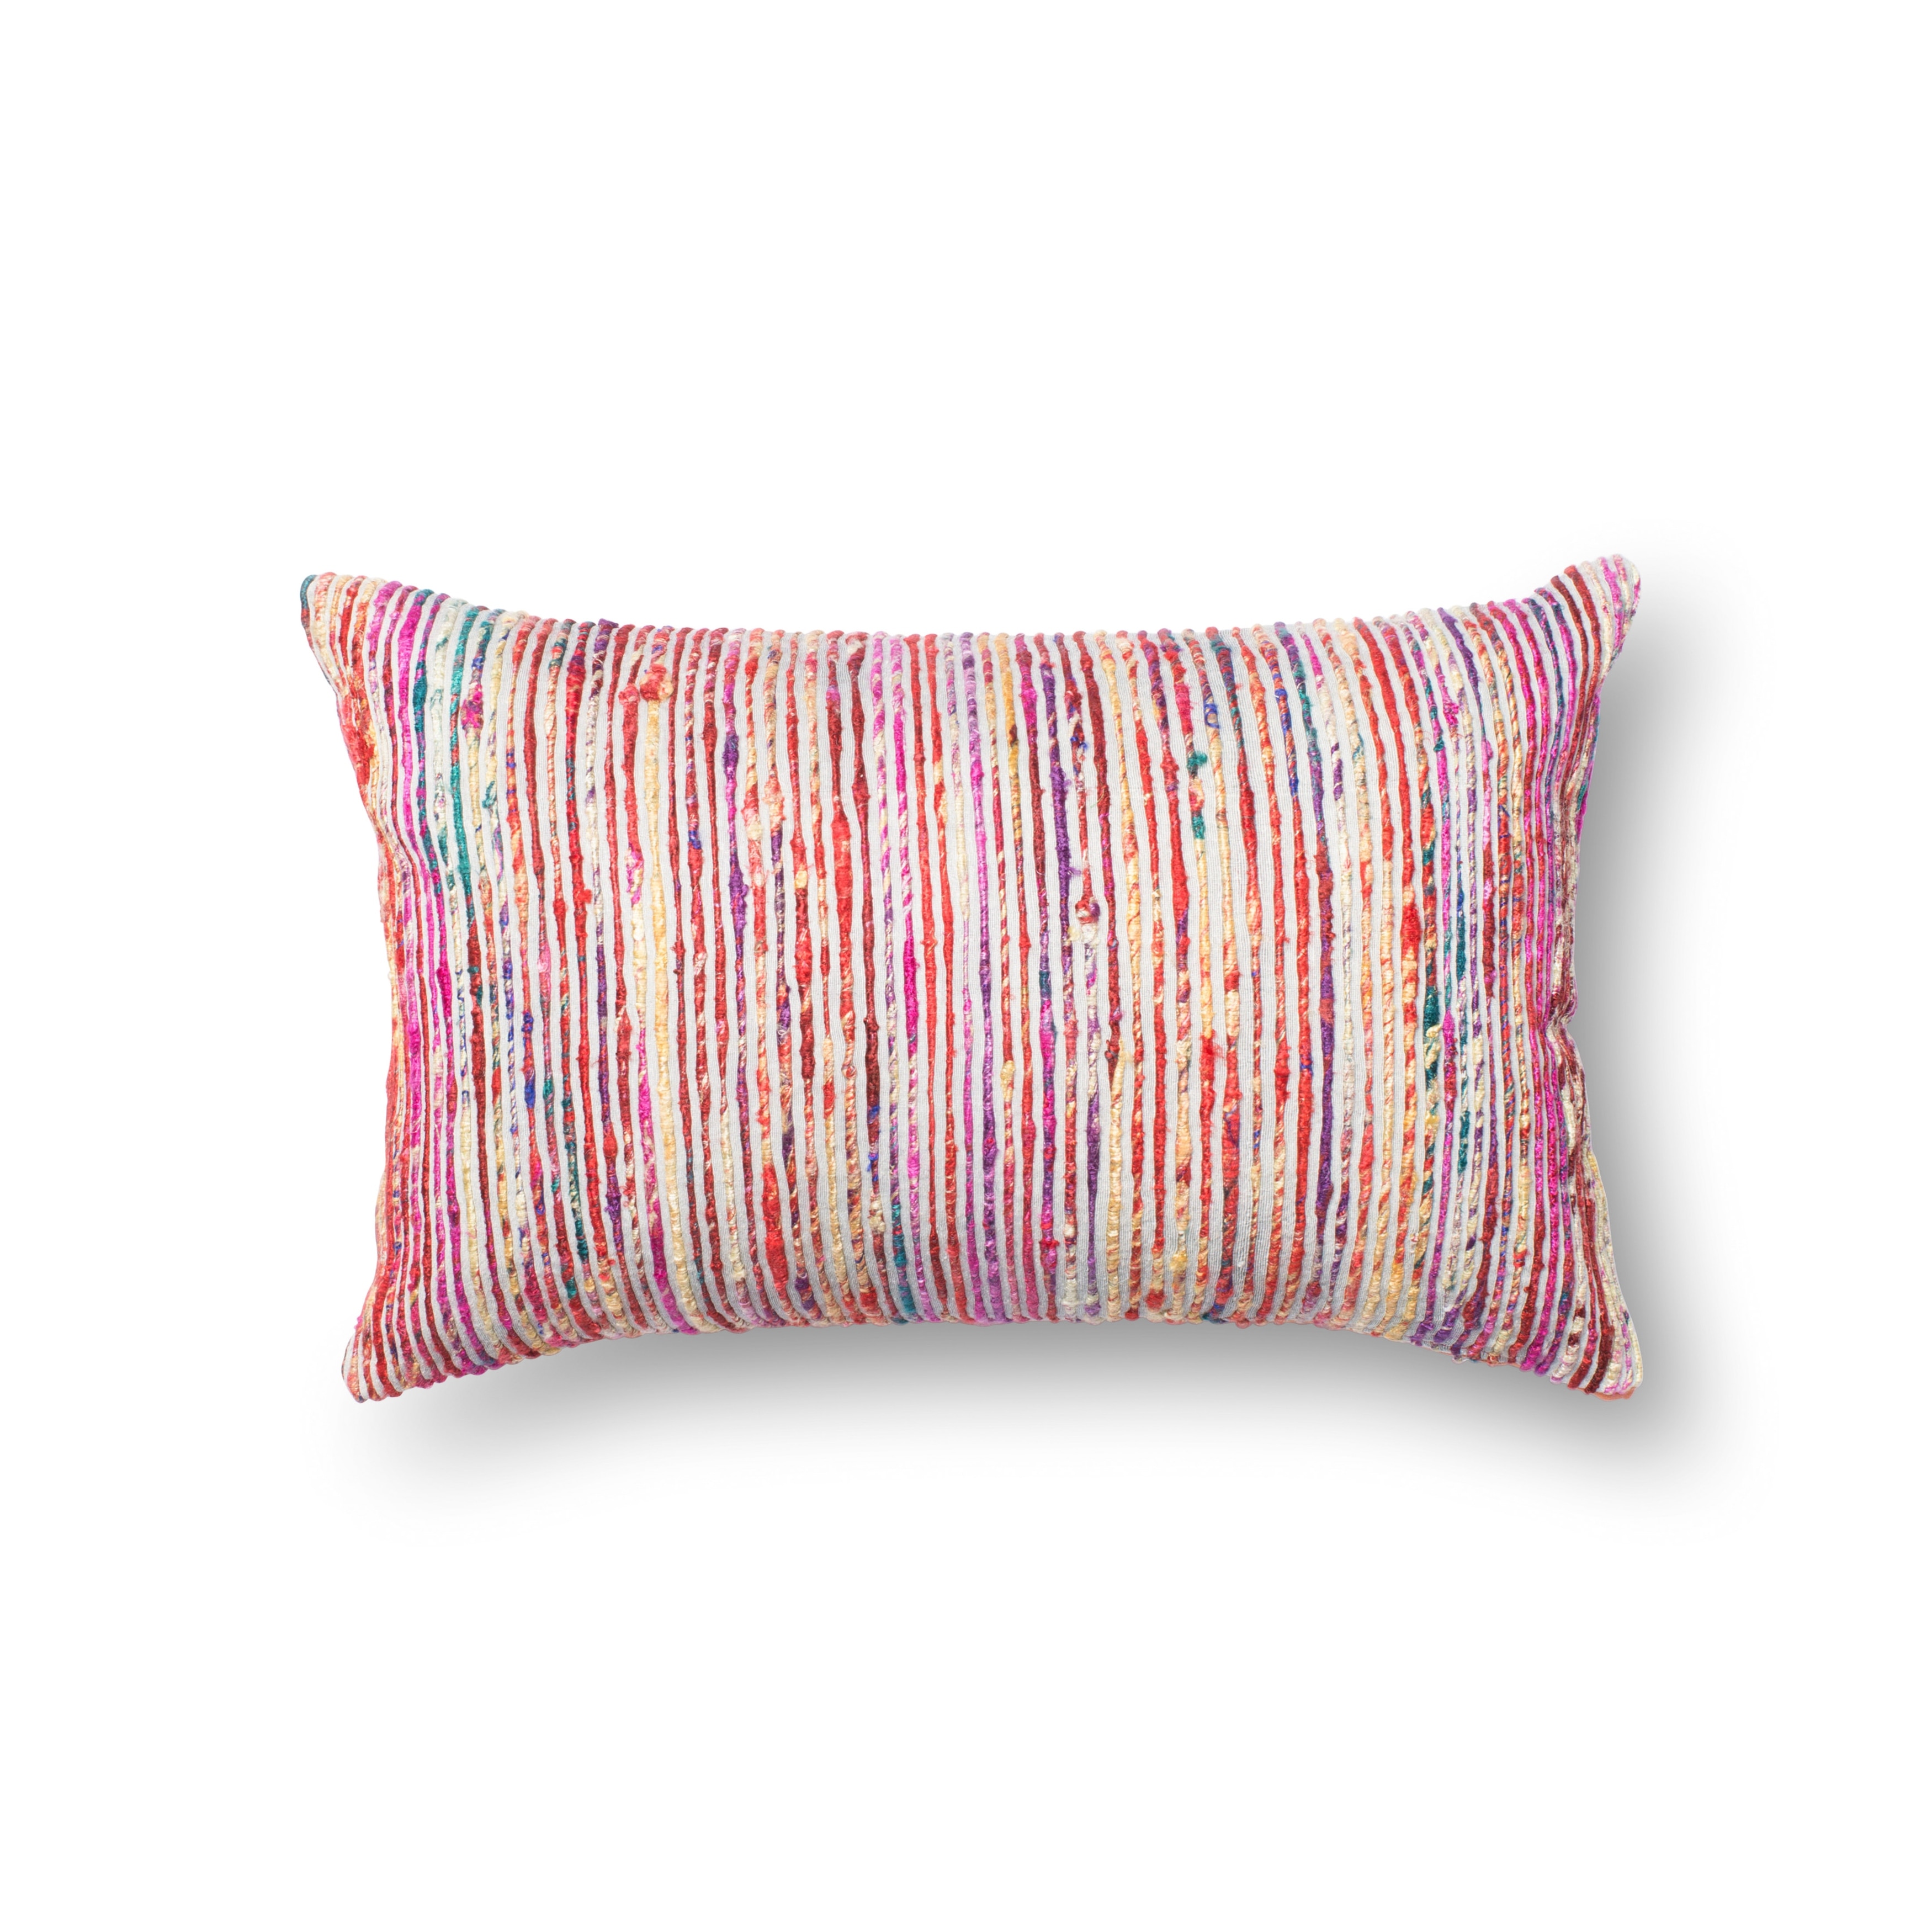 https://ak1.ostkcdn.com/images/products/is/images/direct/68f49e8e9fcb9af2ffaa74ef7dc59ec98a0d3830/Textured-Multi-Stripe-Throw-Pillow-or-Pillow-Cover.jpg